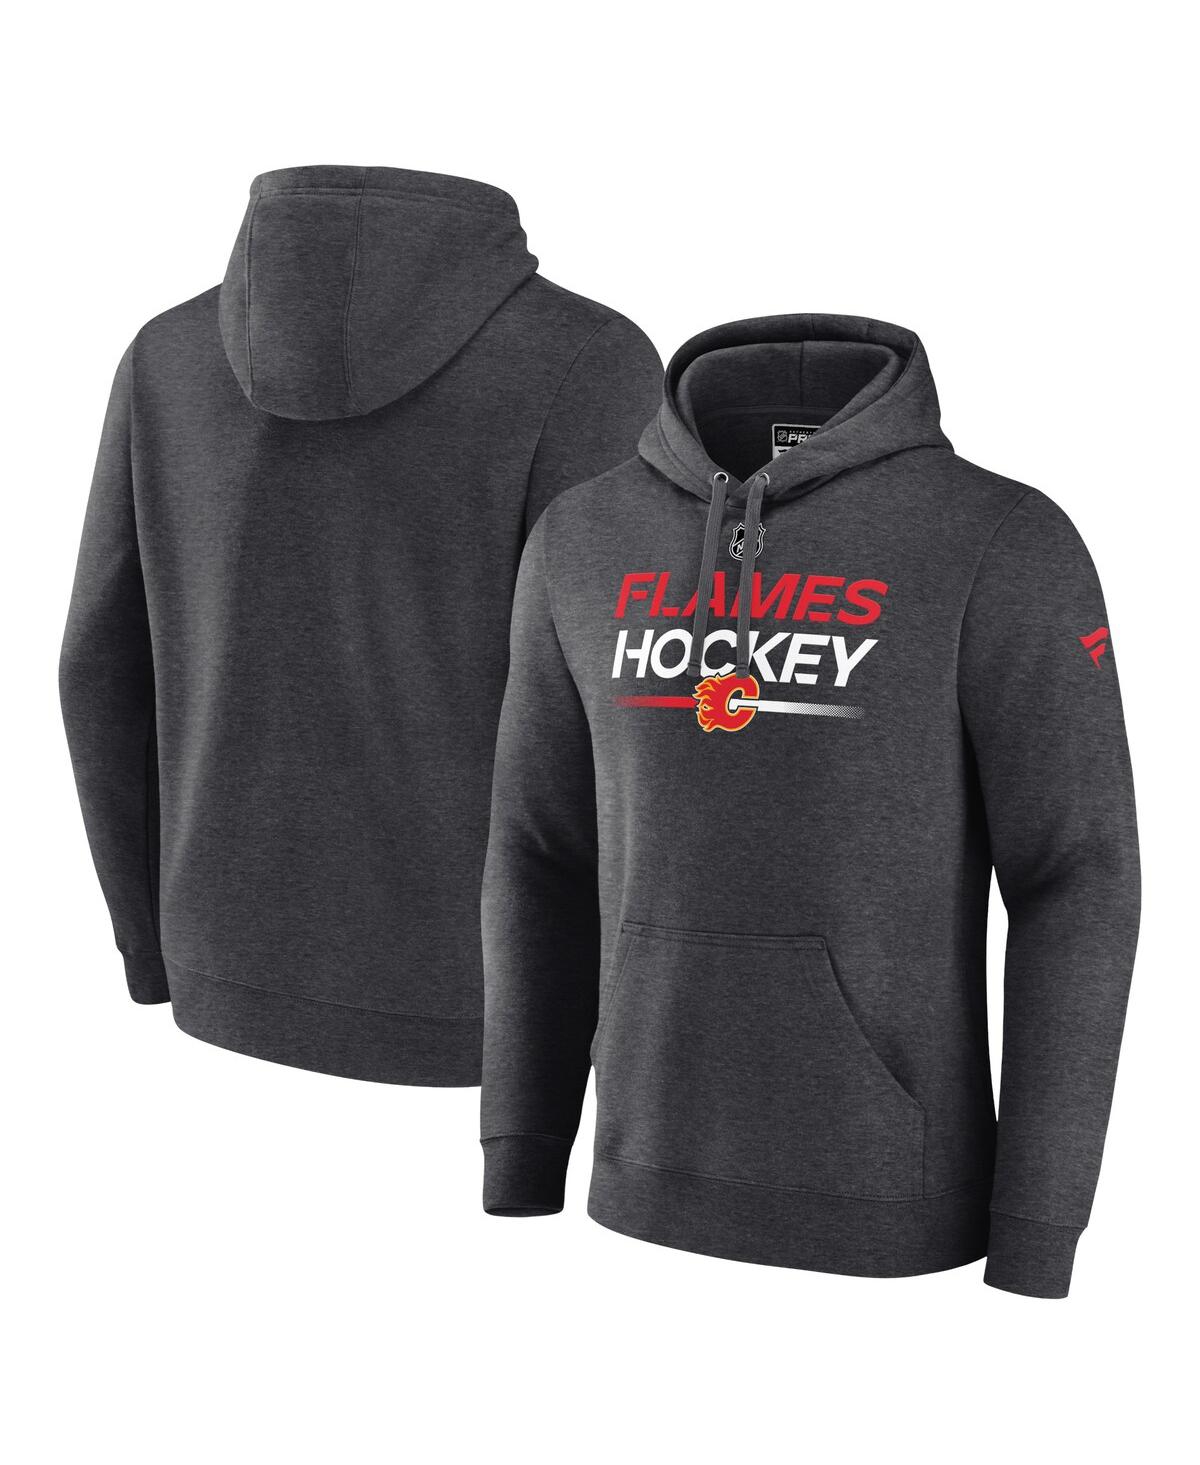 Shop Fanatics Men's  Heather Charcoal Calgary Flames Authentic Pro Pullover Hoodie